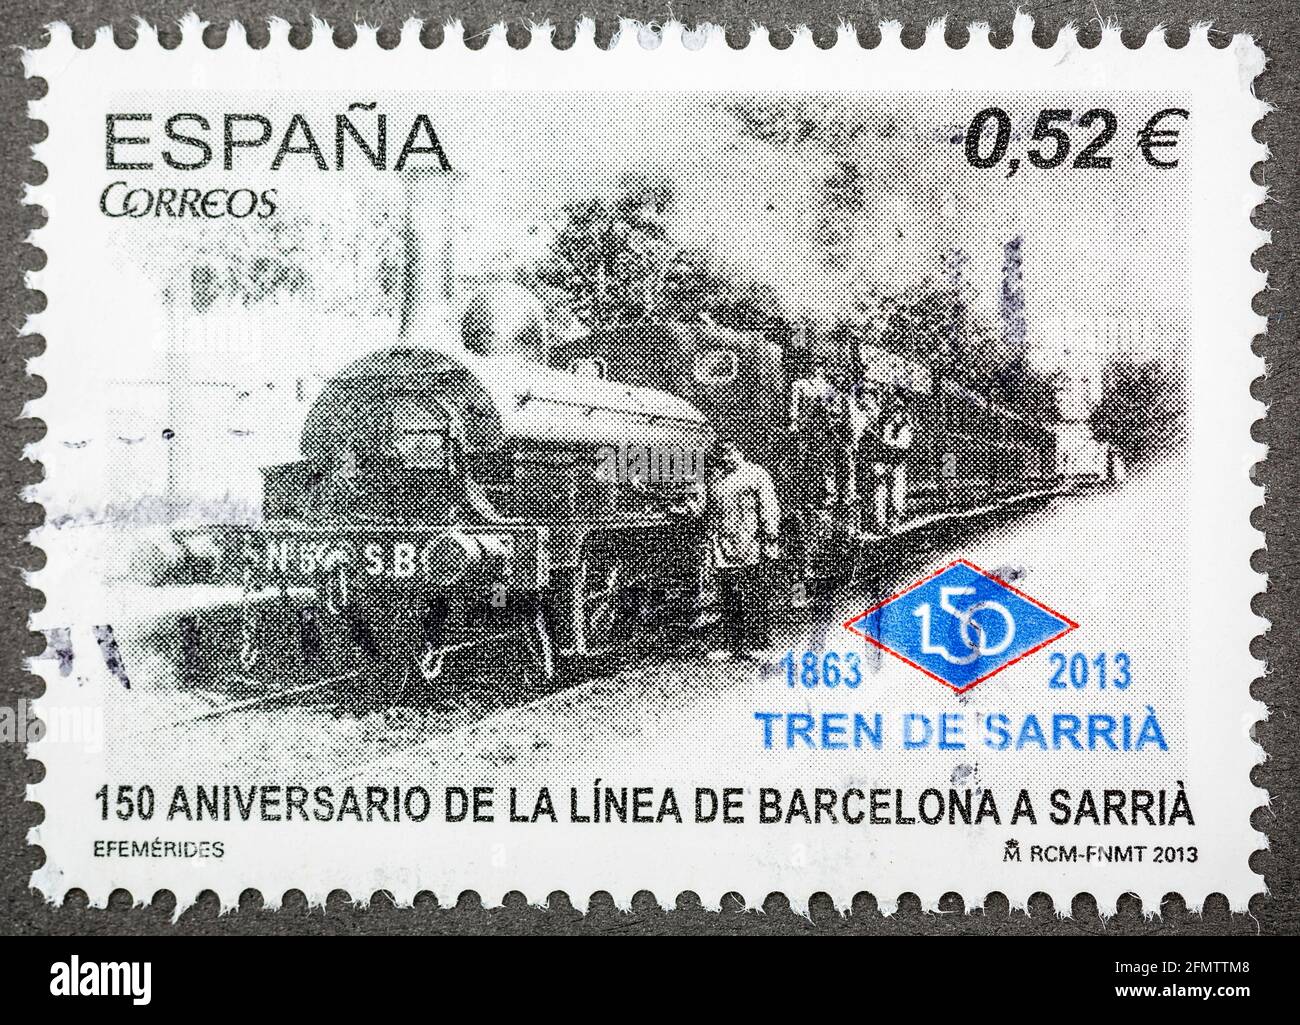 SPAIN - CIRCA 2013: A stamp printed in Spain shows 150th anniversary of the first train Barcelona Sarria, circa 2013. Stock Photo